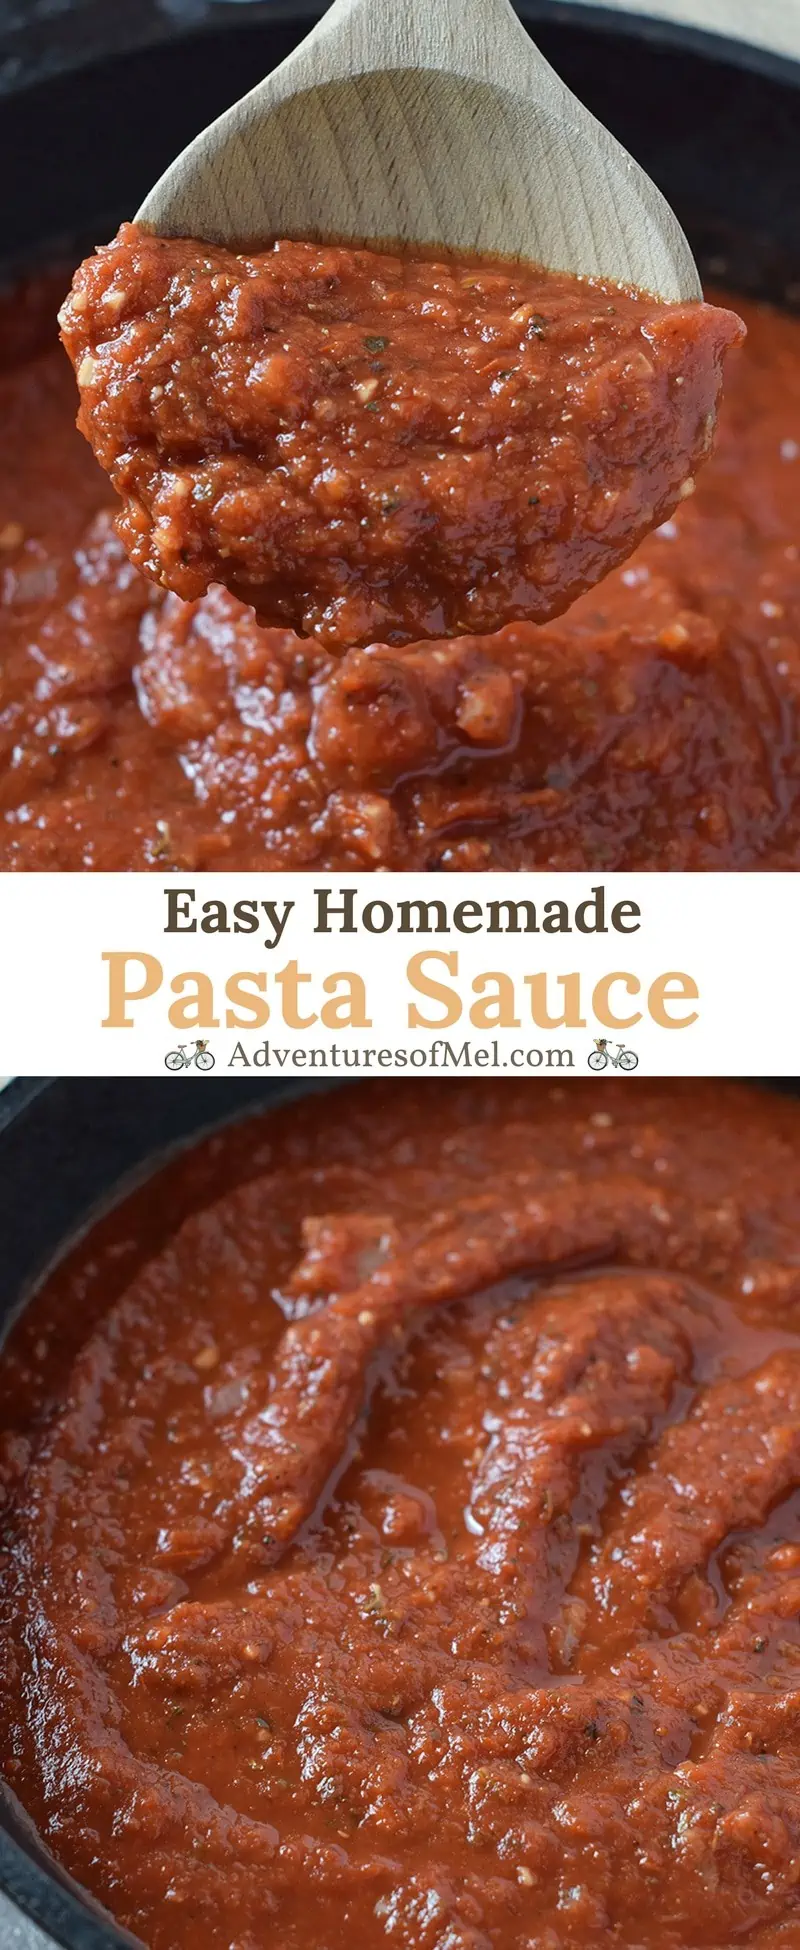 Homemade Pasta Sauce for spaghetti, lasagna, and other favorite pasta dishes. Simple ingredients and delicious flavor, good with meat or go meatless!